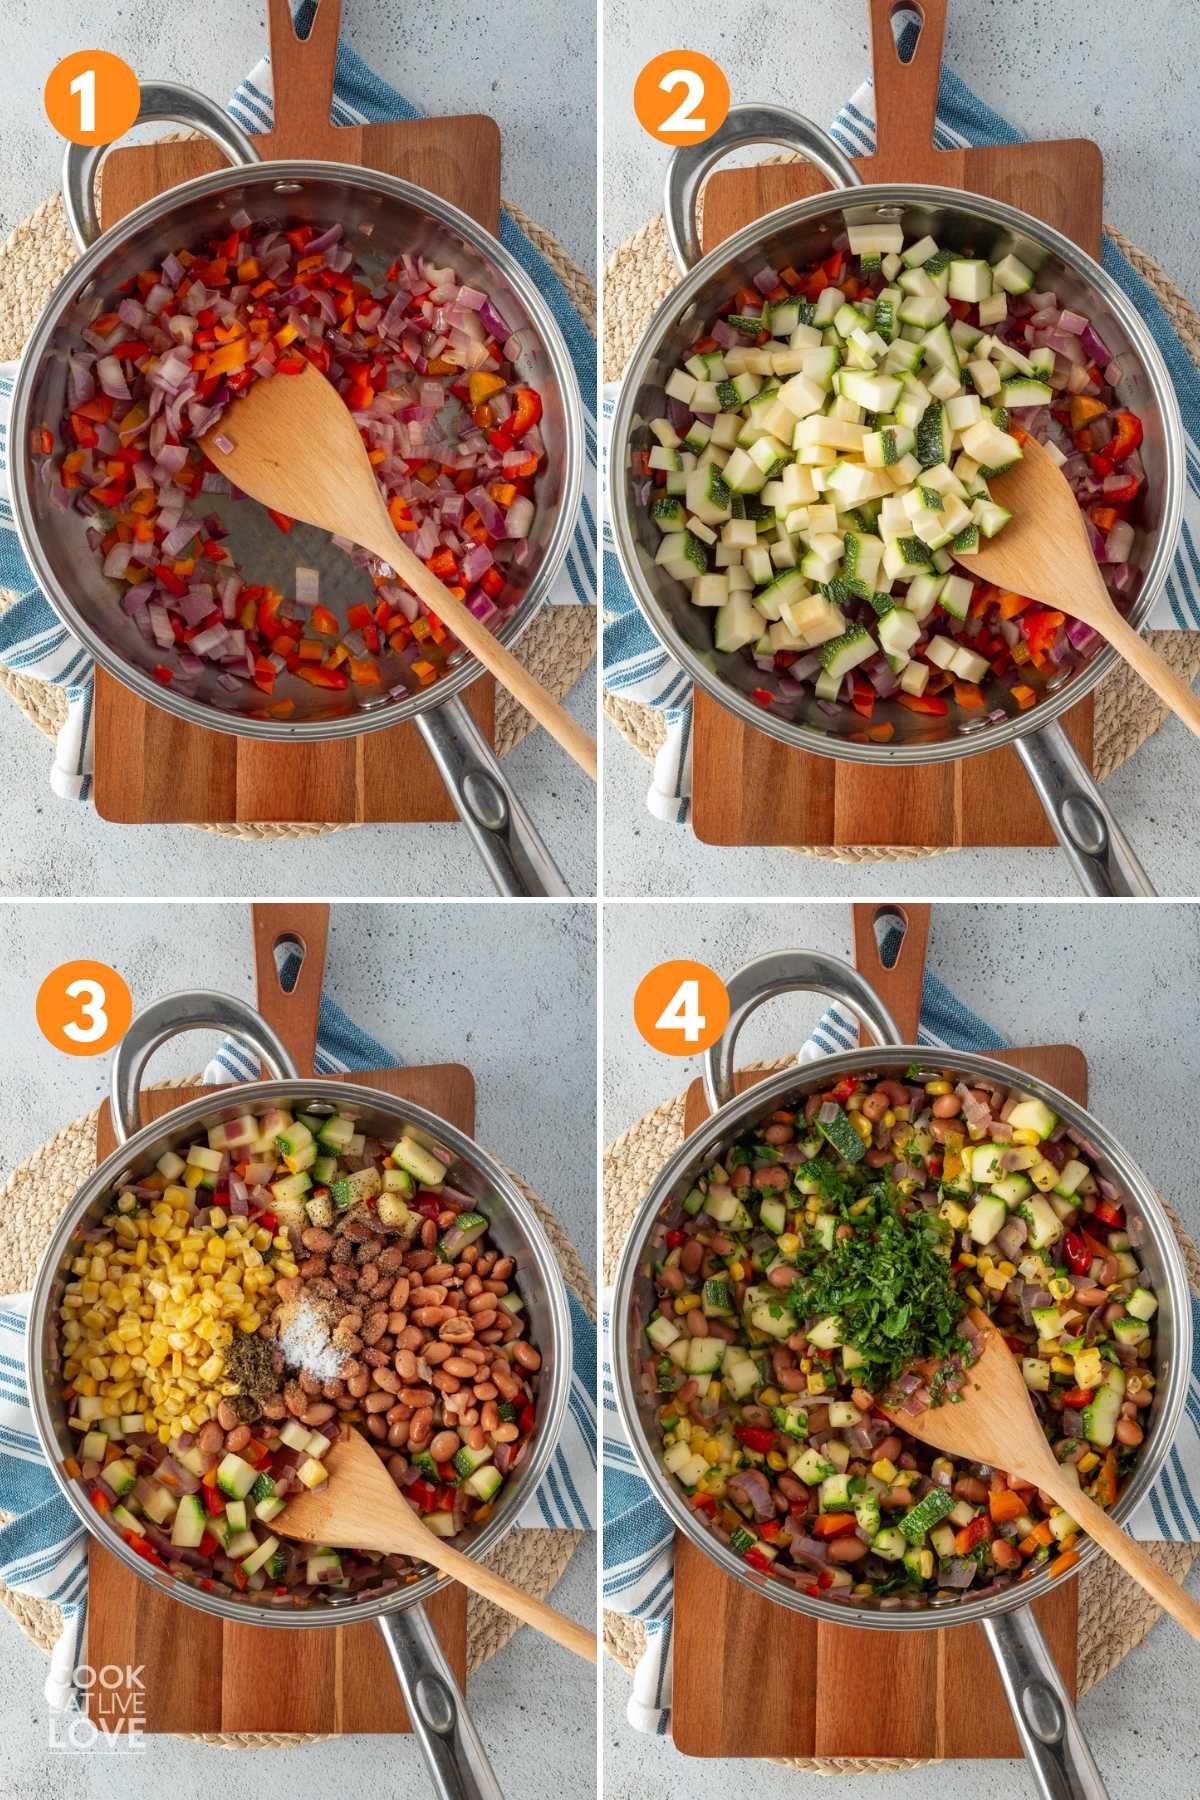 A collage of images showing the steps for making the vegetable filling for the enchilada casserole.